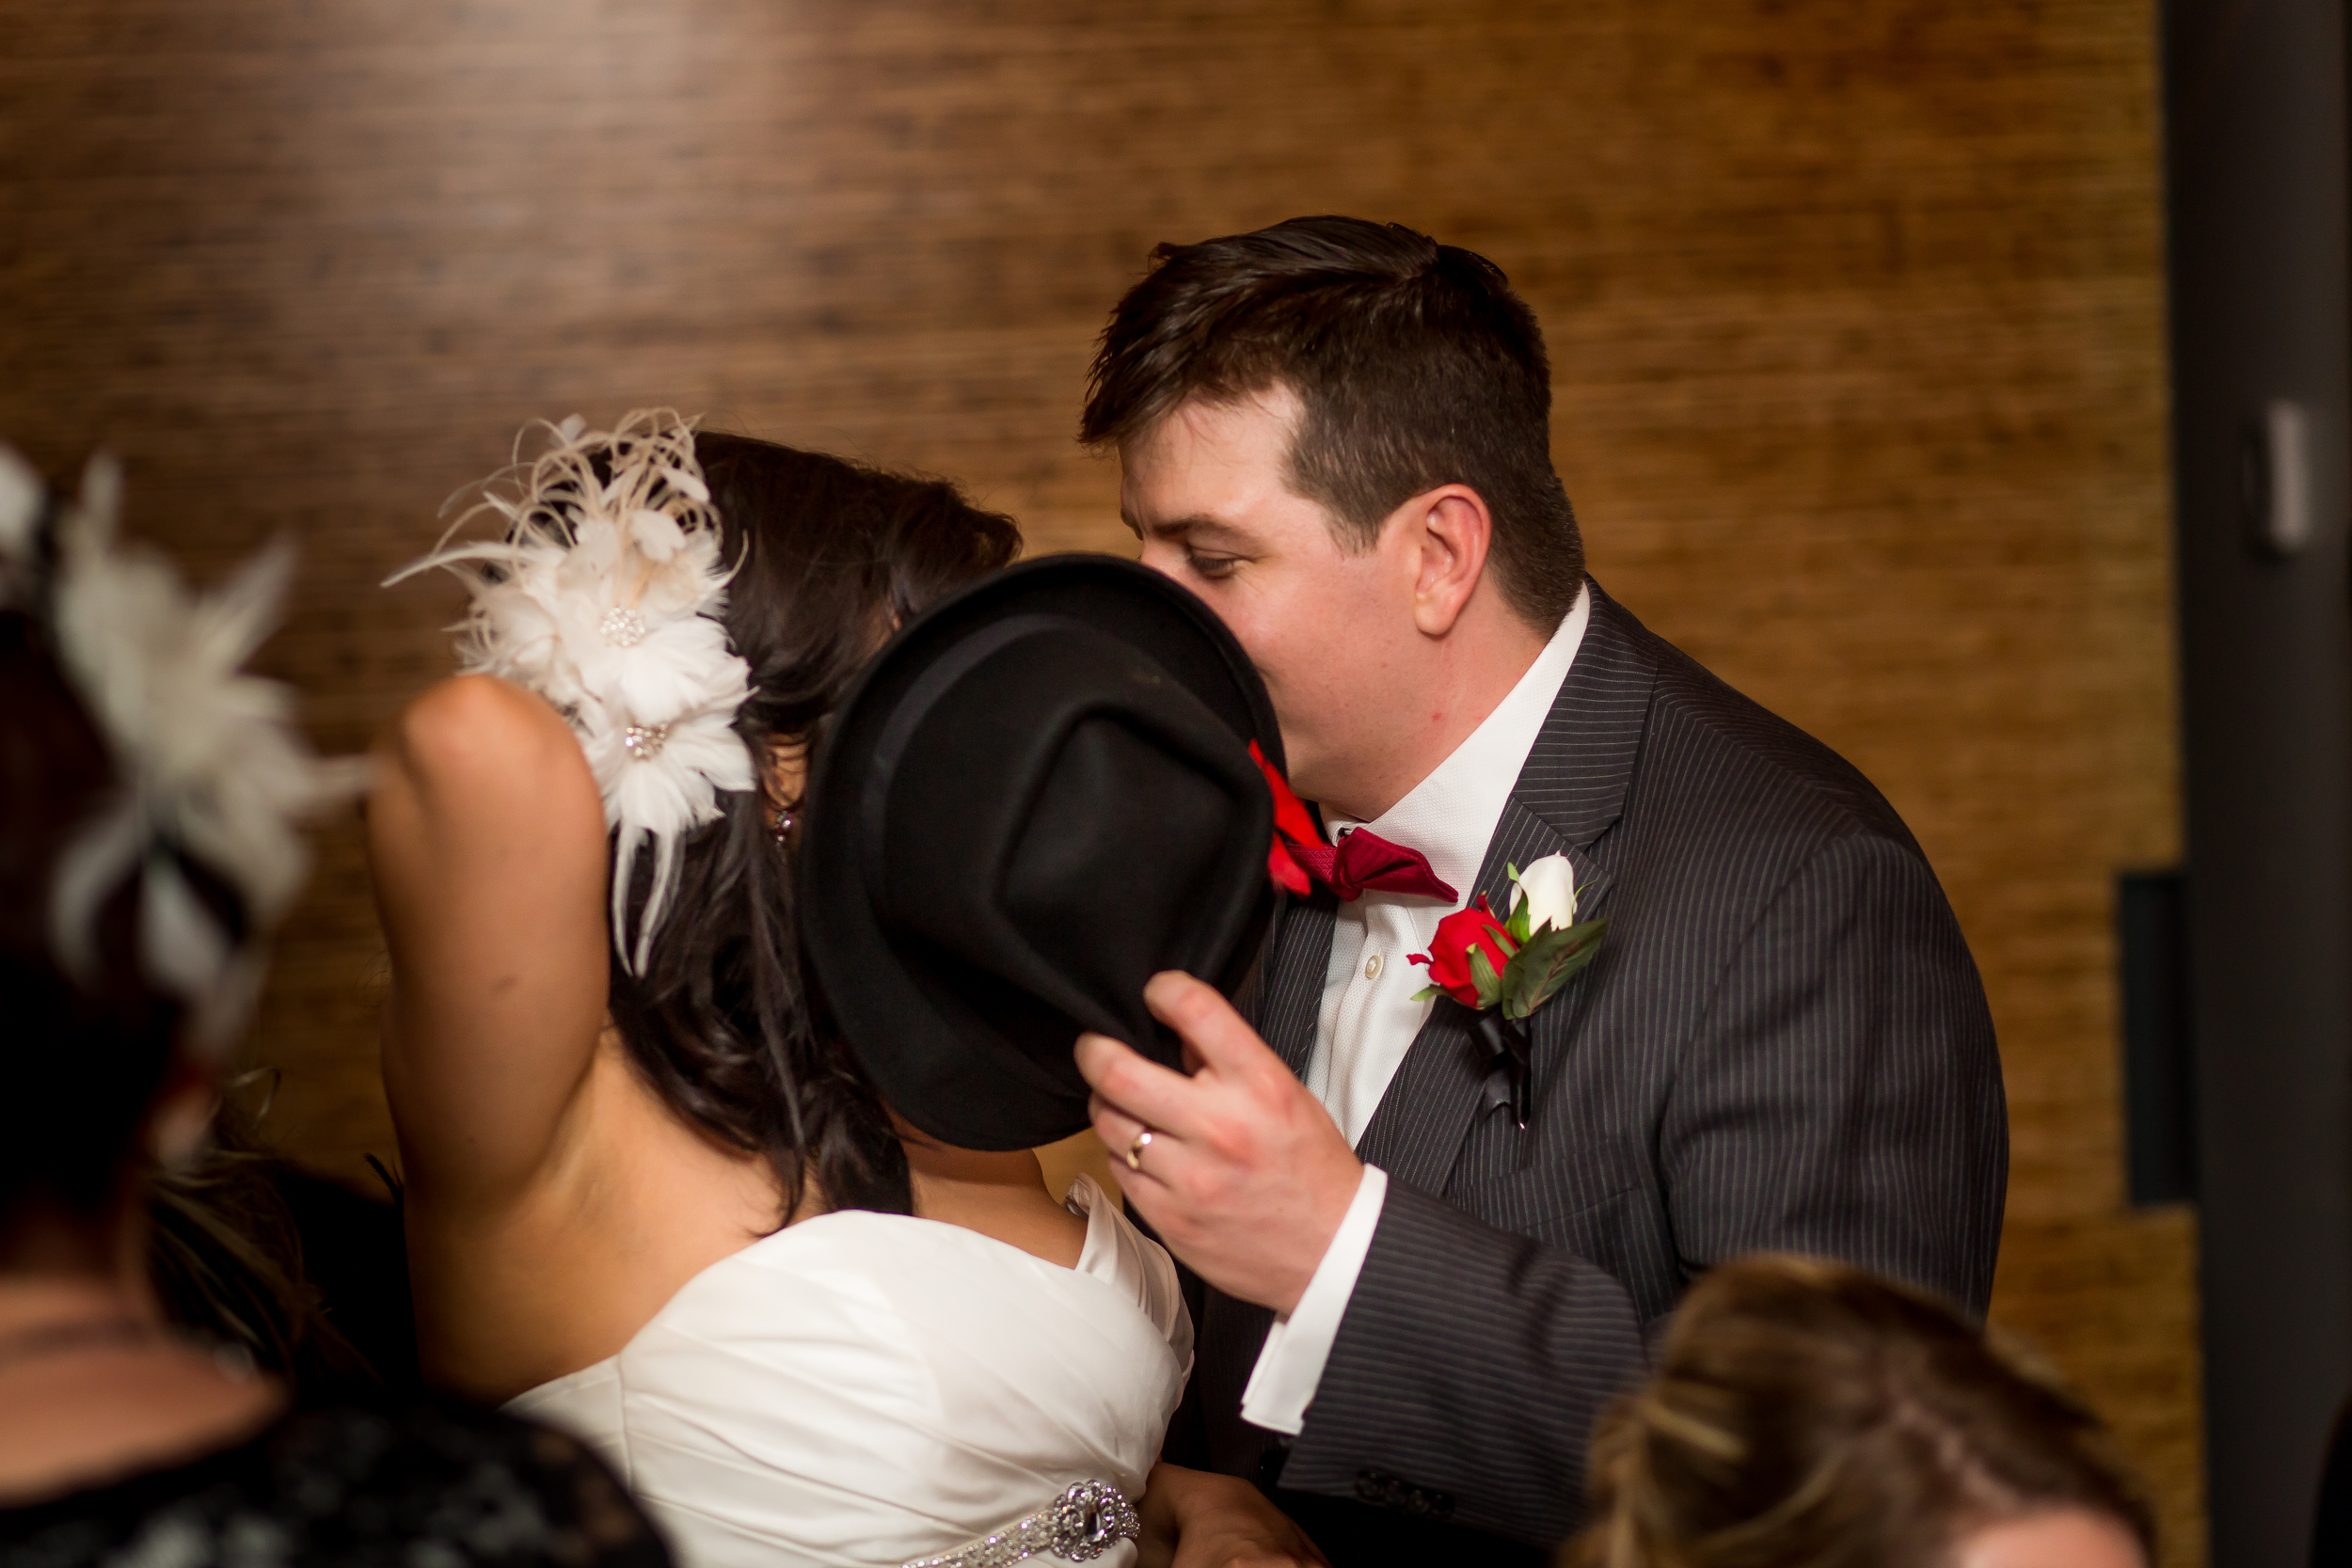 The bride and groom sneaking a kiss at their wedding reception